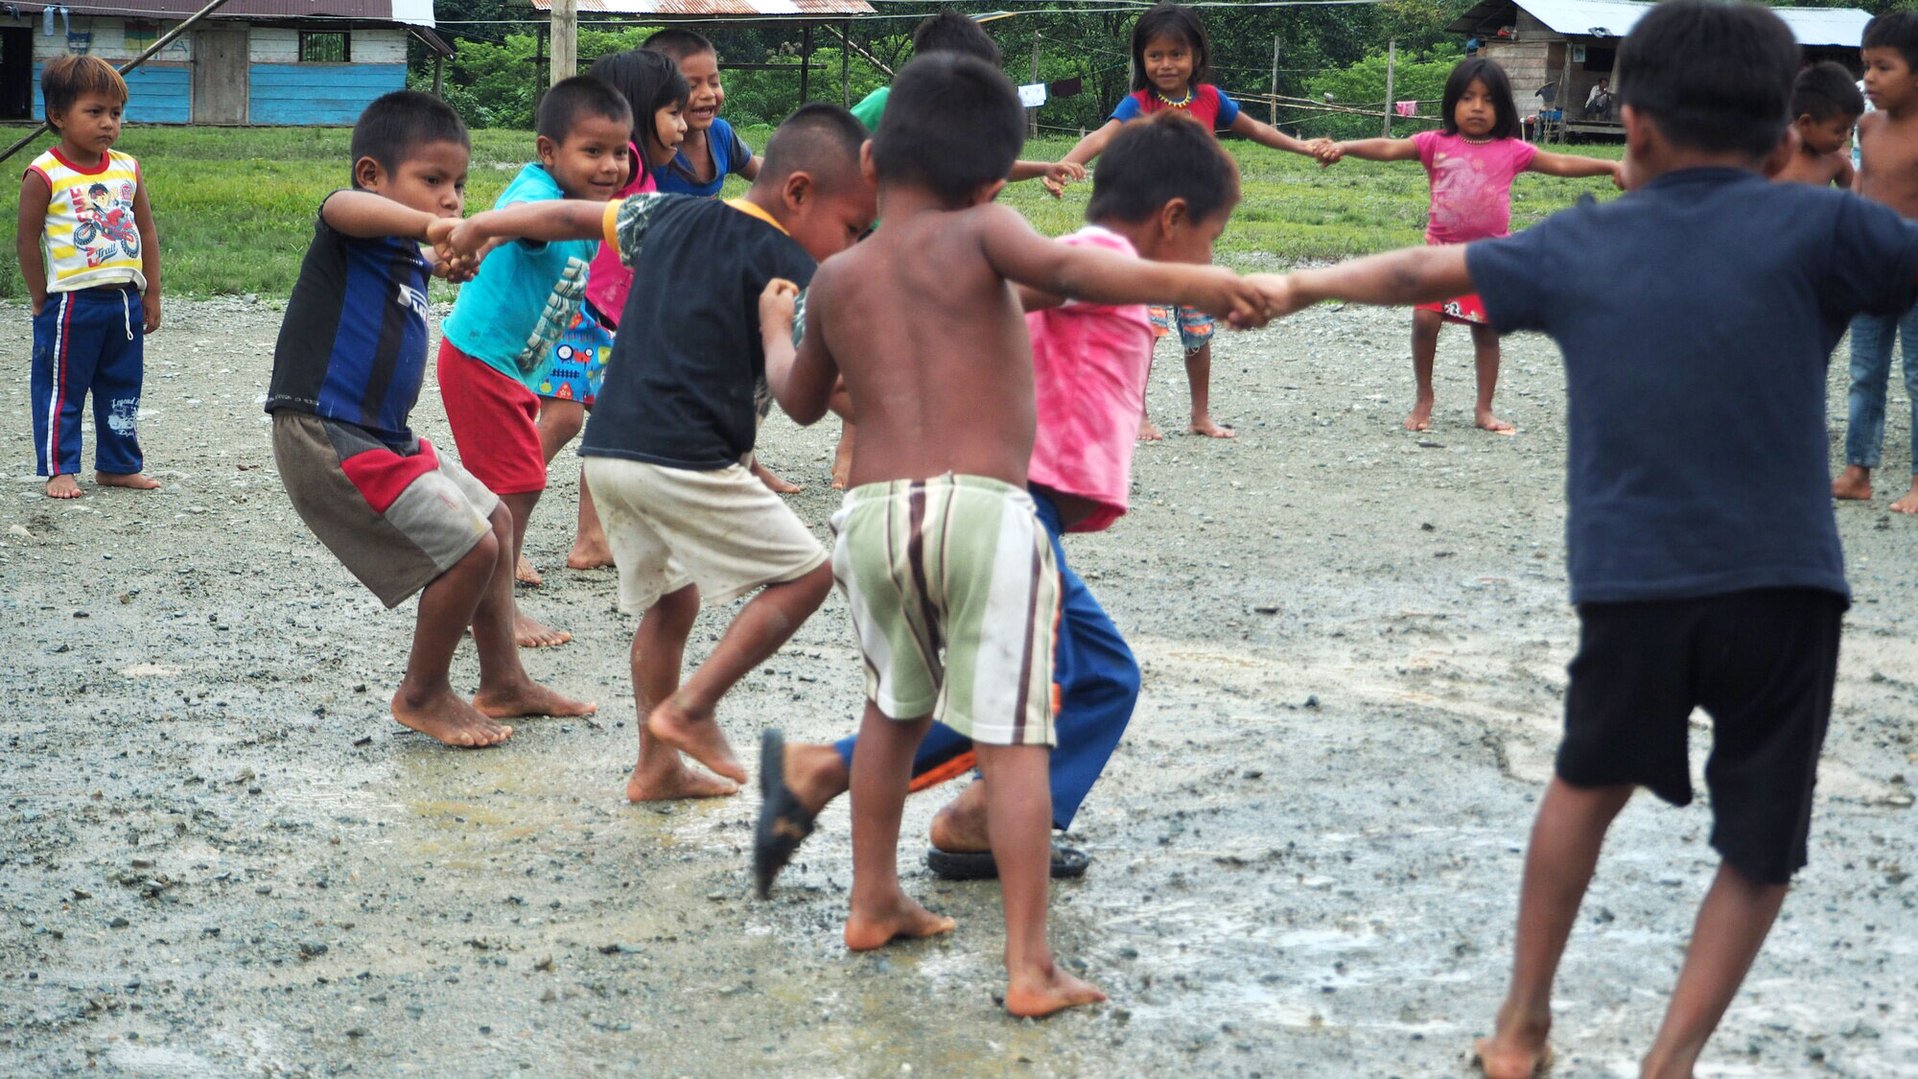 Indigenous children in Colombia playing in one of War Child psychosocial support activities